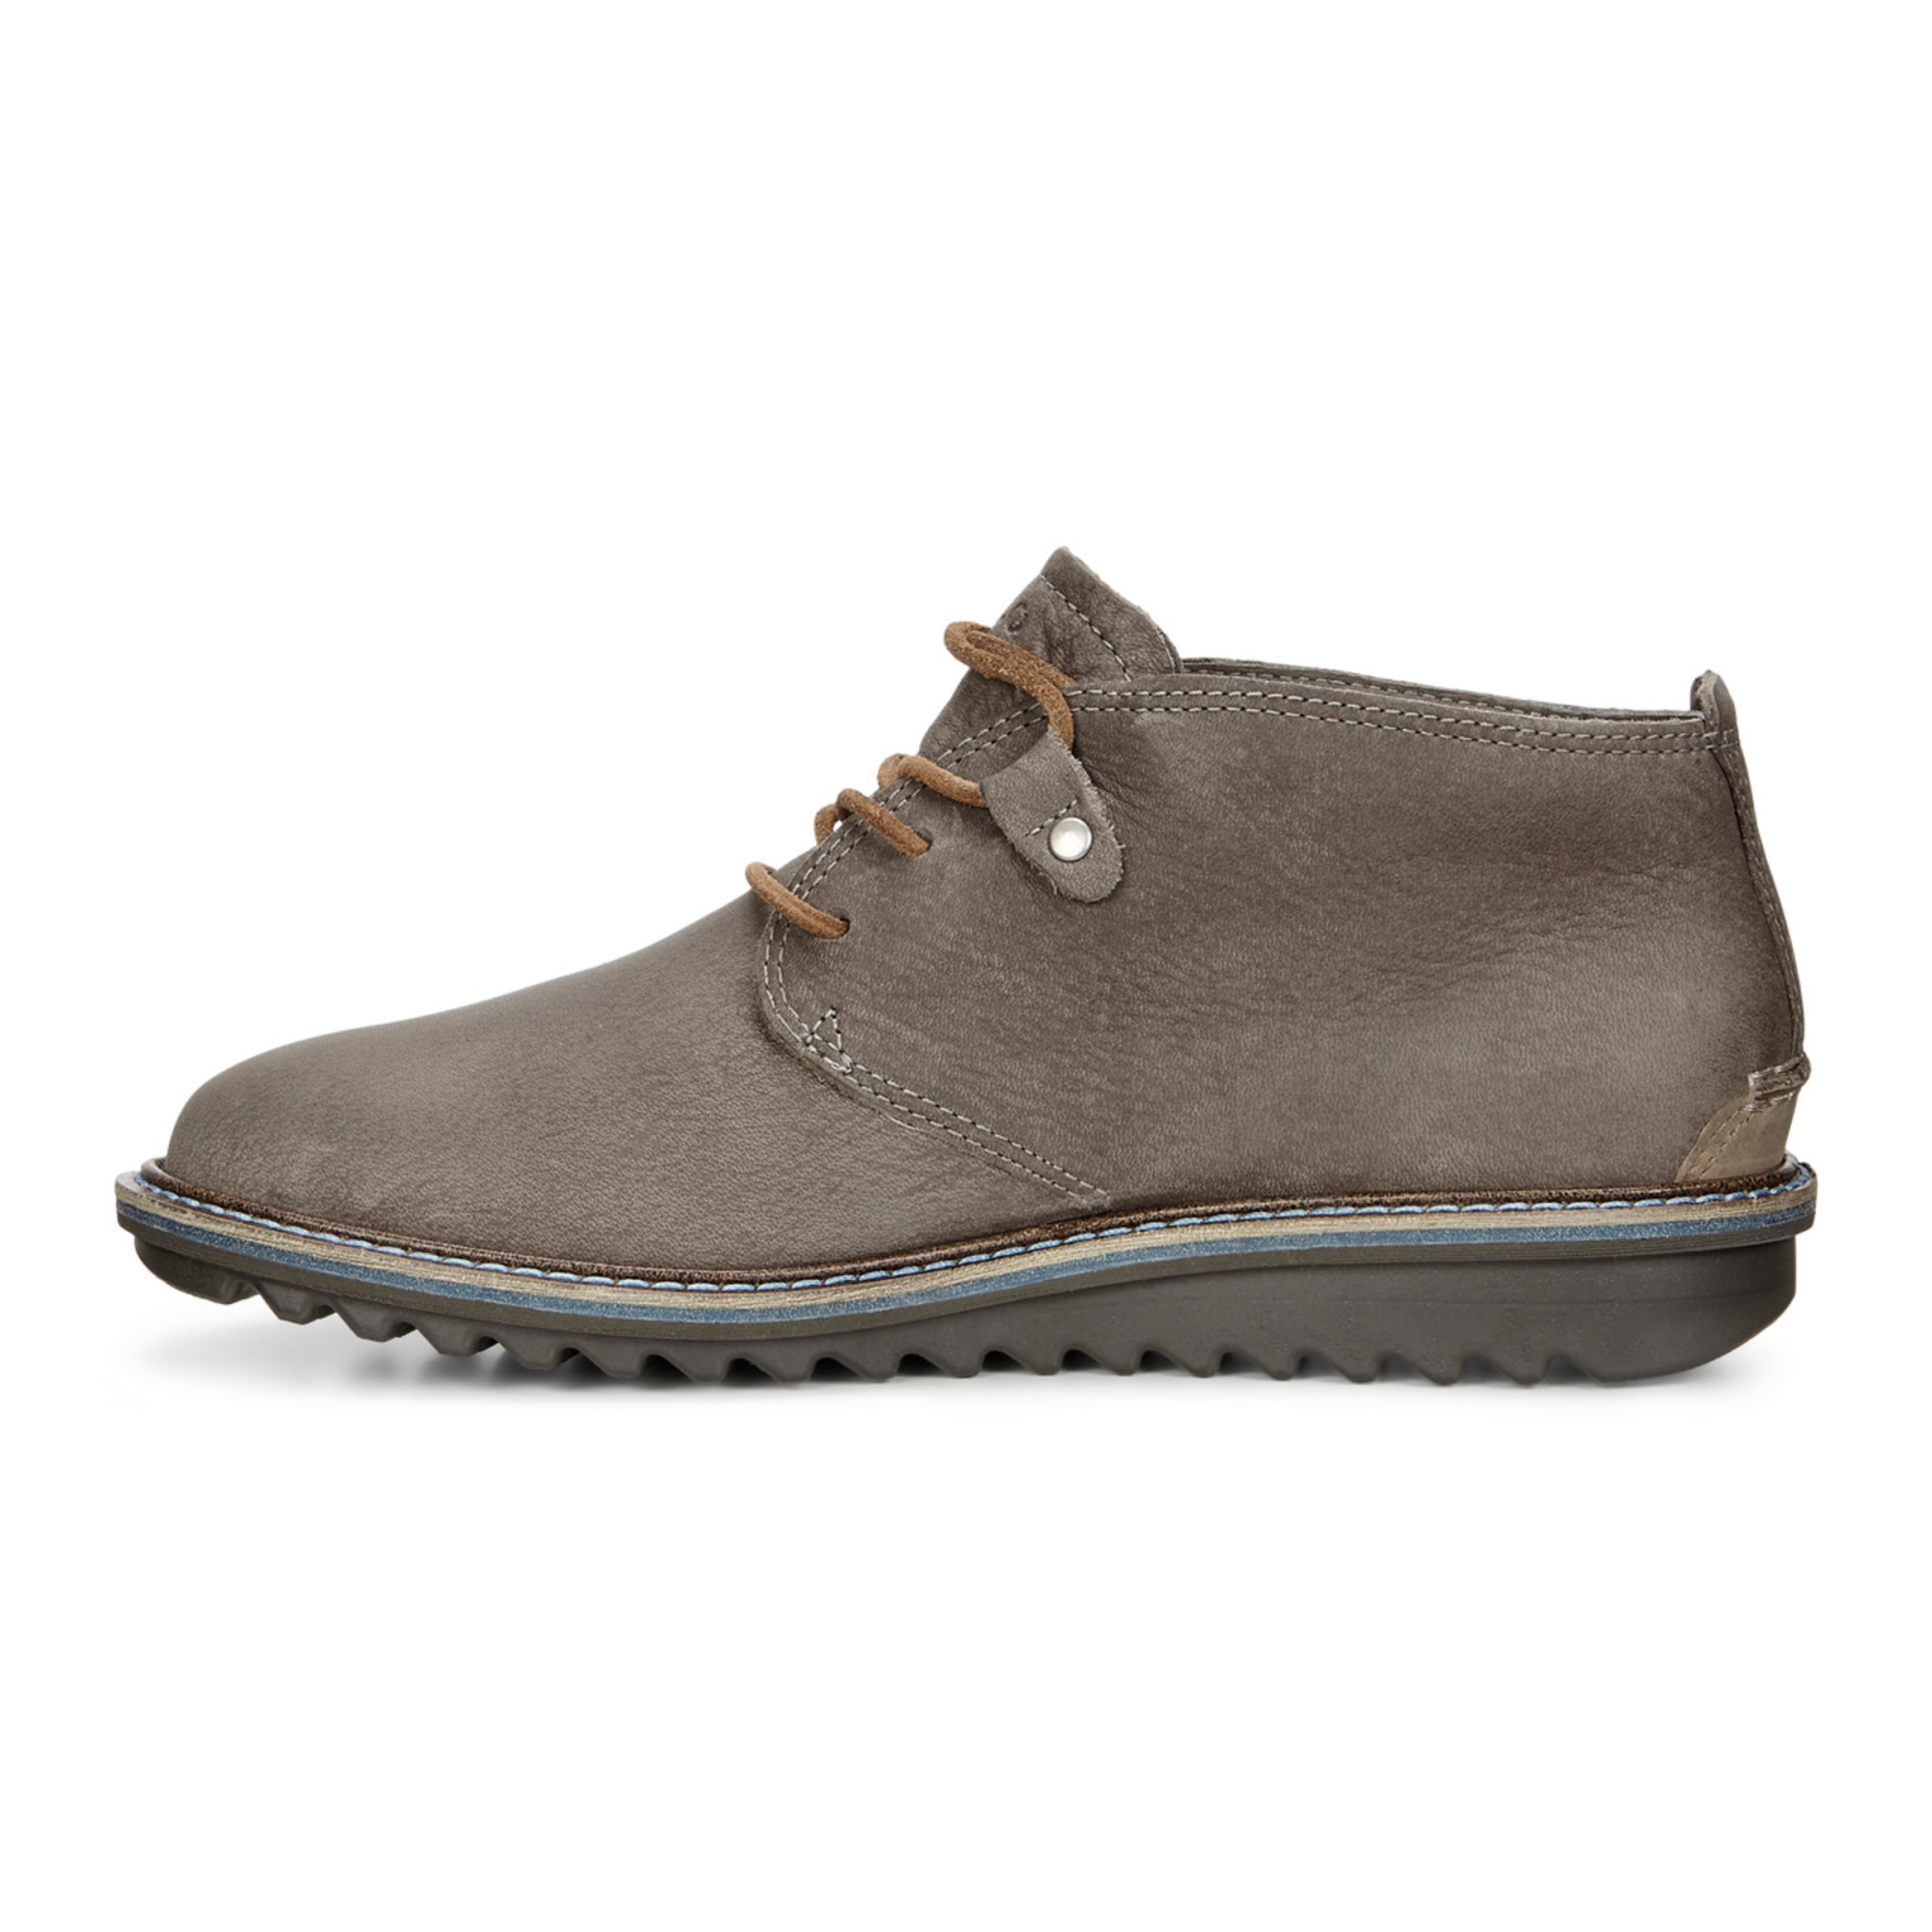 Sicilien tempo Løb Ecco Elaine Flatform Desert 41 - Products - Veryk Mall - Veryk Mall, many  product, quick response, safe your money!